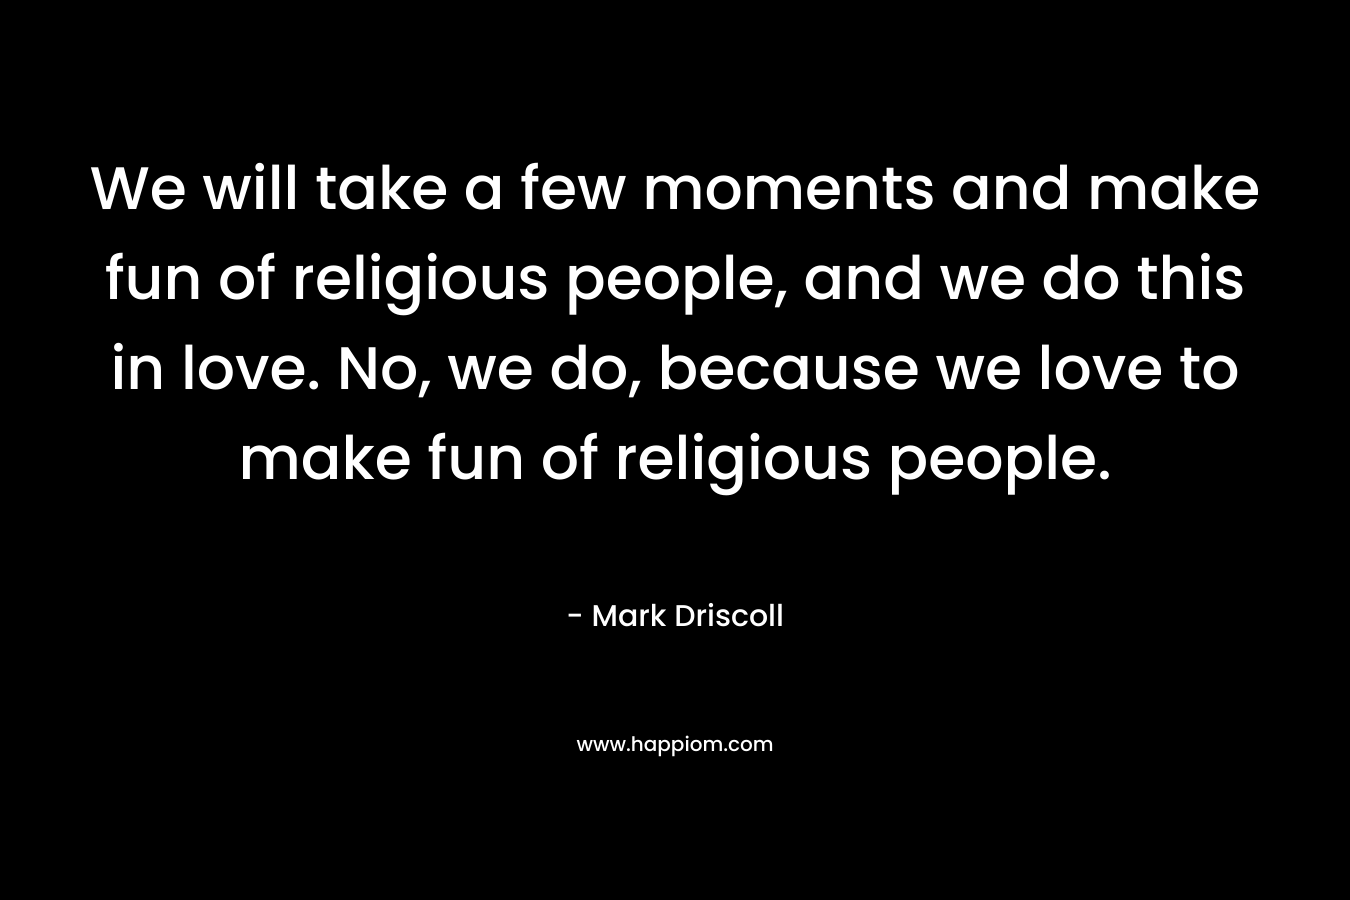 We will take a few moments and make fun of religious people, and we do this in love. No, we do, because we love to make fun of religious people. – Mark Driscoll